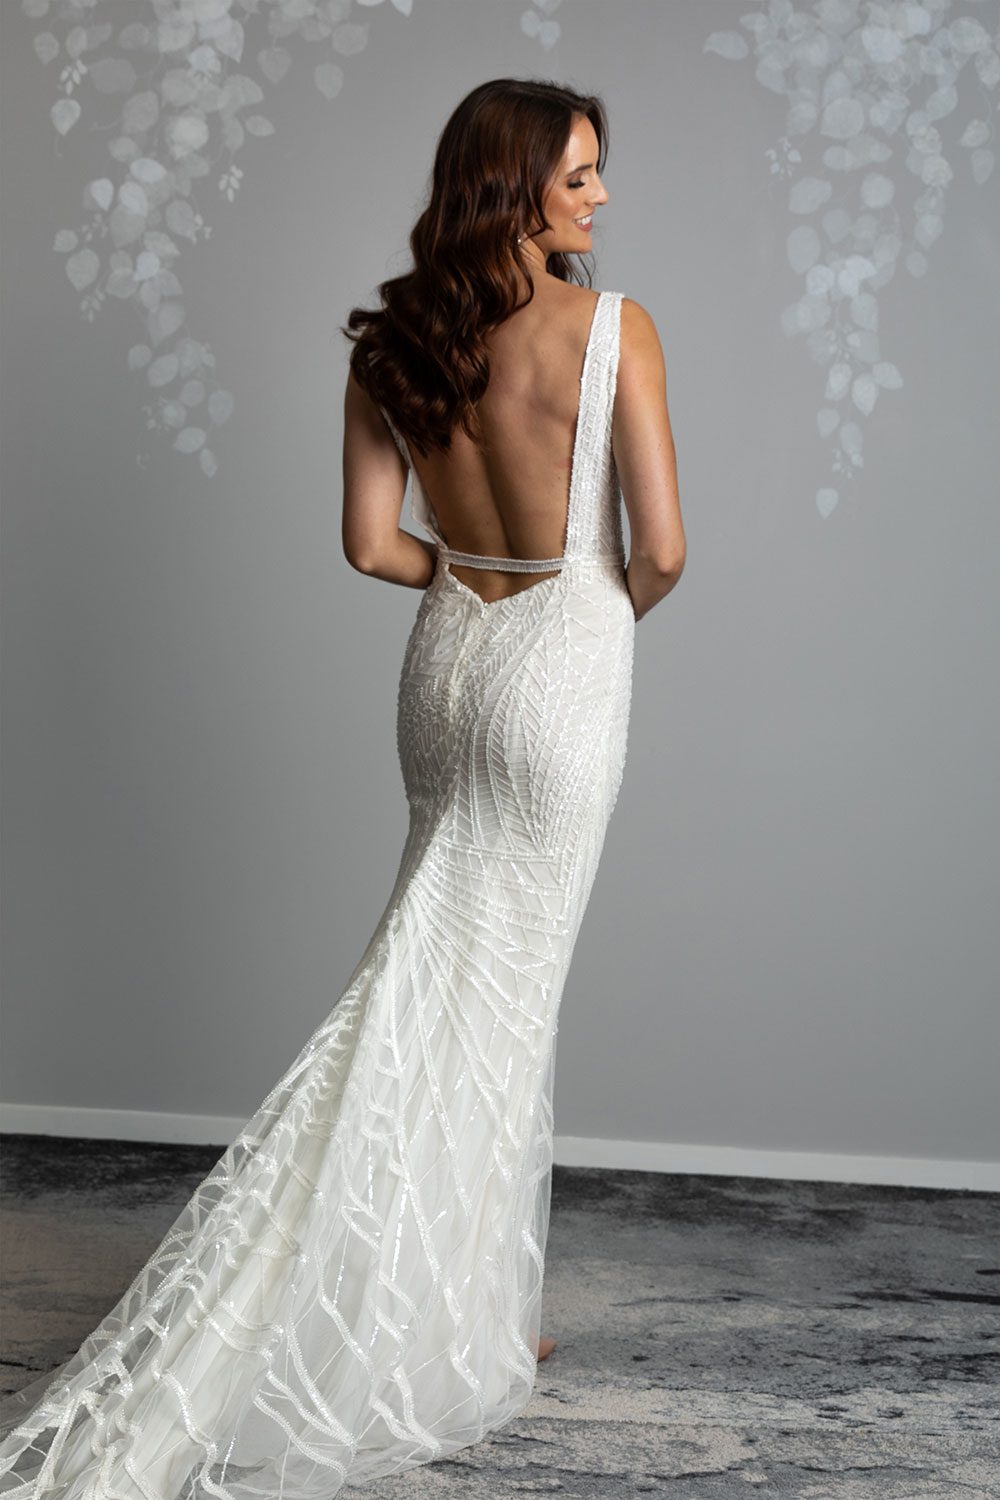 Elle Wedding gown from Vinka Design - Wedding dress with illusion neckline and deep plunge in the front with low back. Stunning beaded embroidery over a stretch base that sculpts and flatters the figure and falls into a beautiful flared train. Back view of dress showing low back with beaded strap and stunning flared train